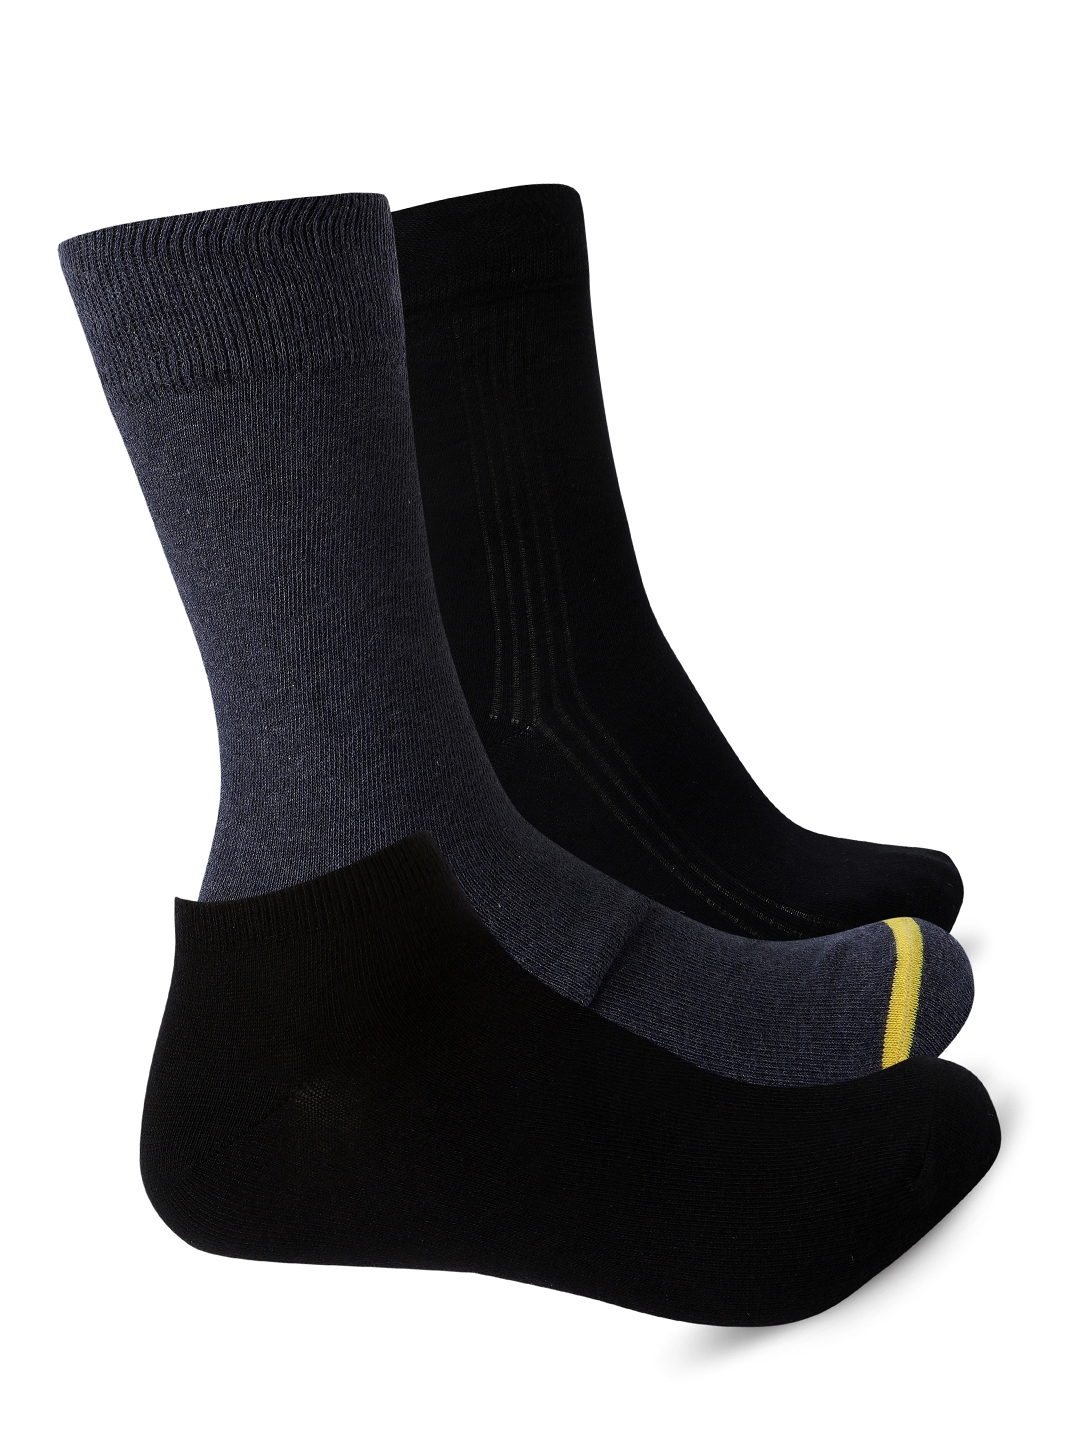 Smarty Pants | Smarty Pants men's pack of 3 solid cotton socks. 